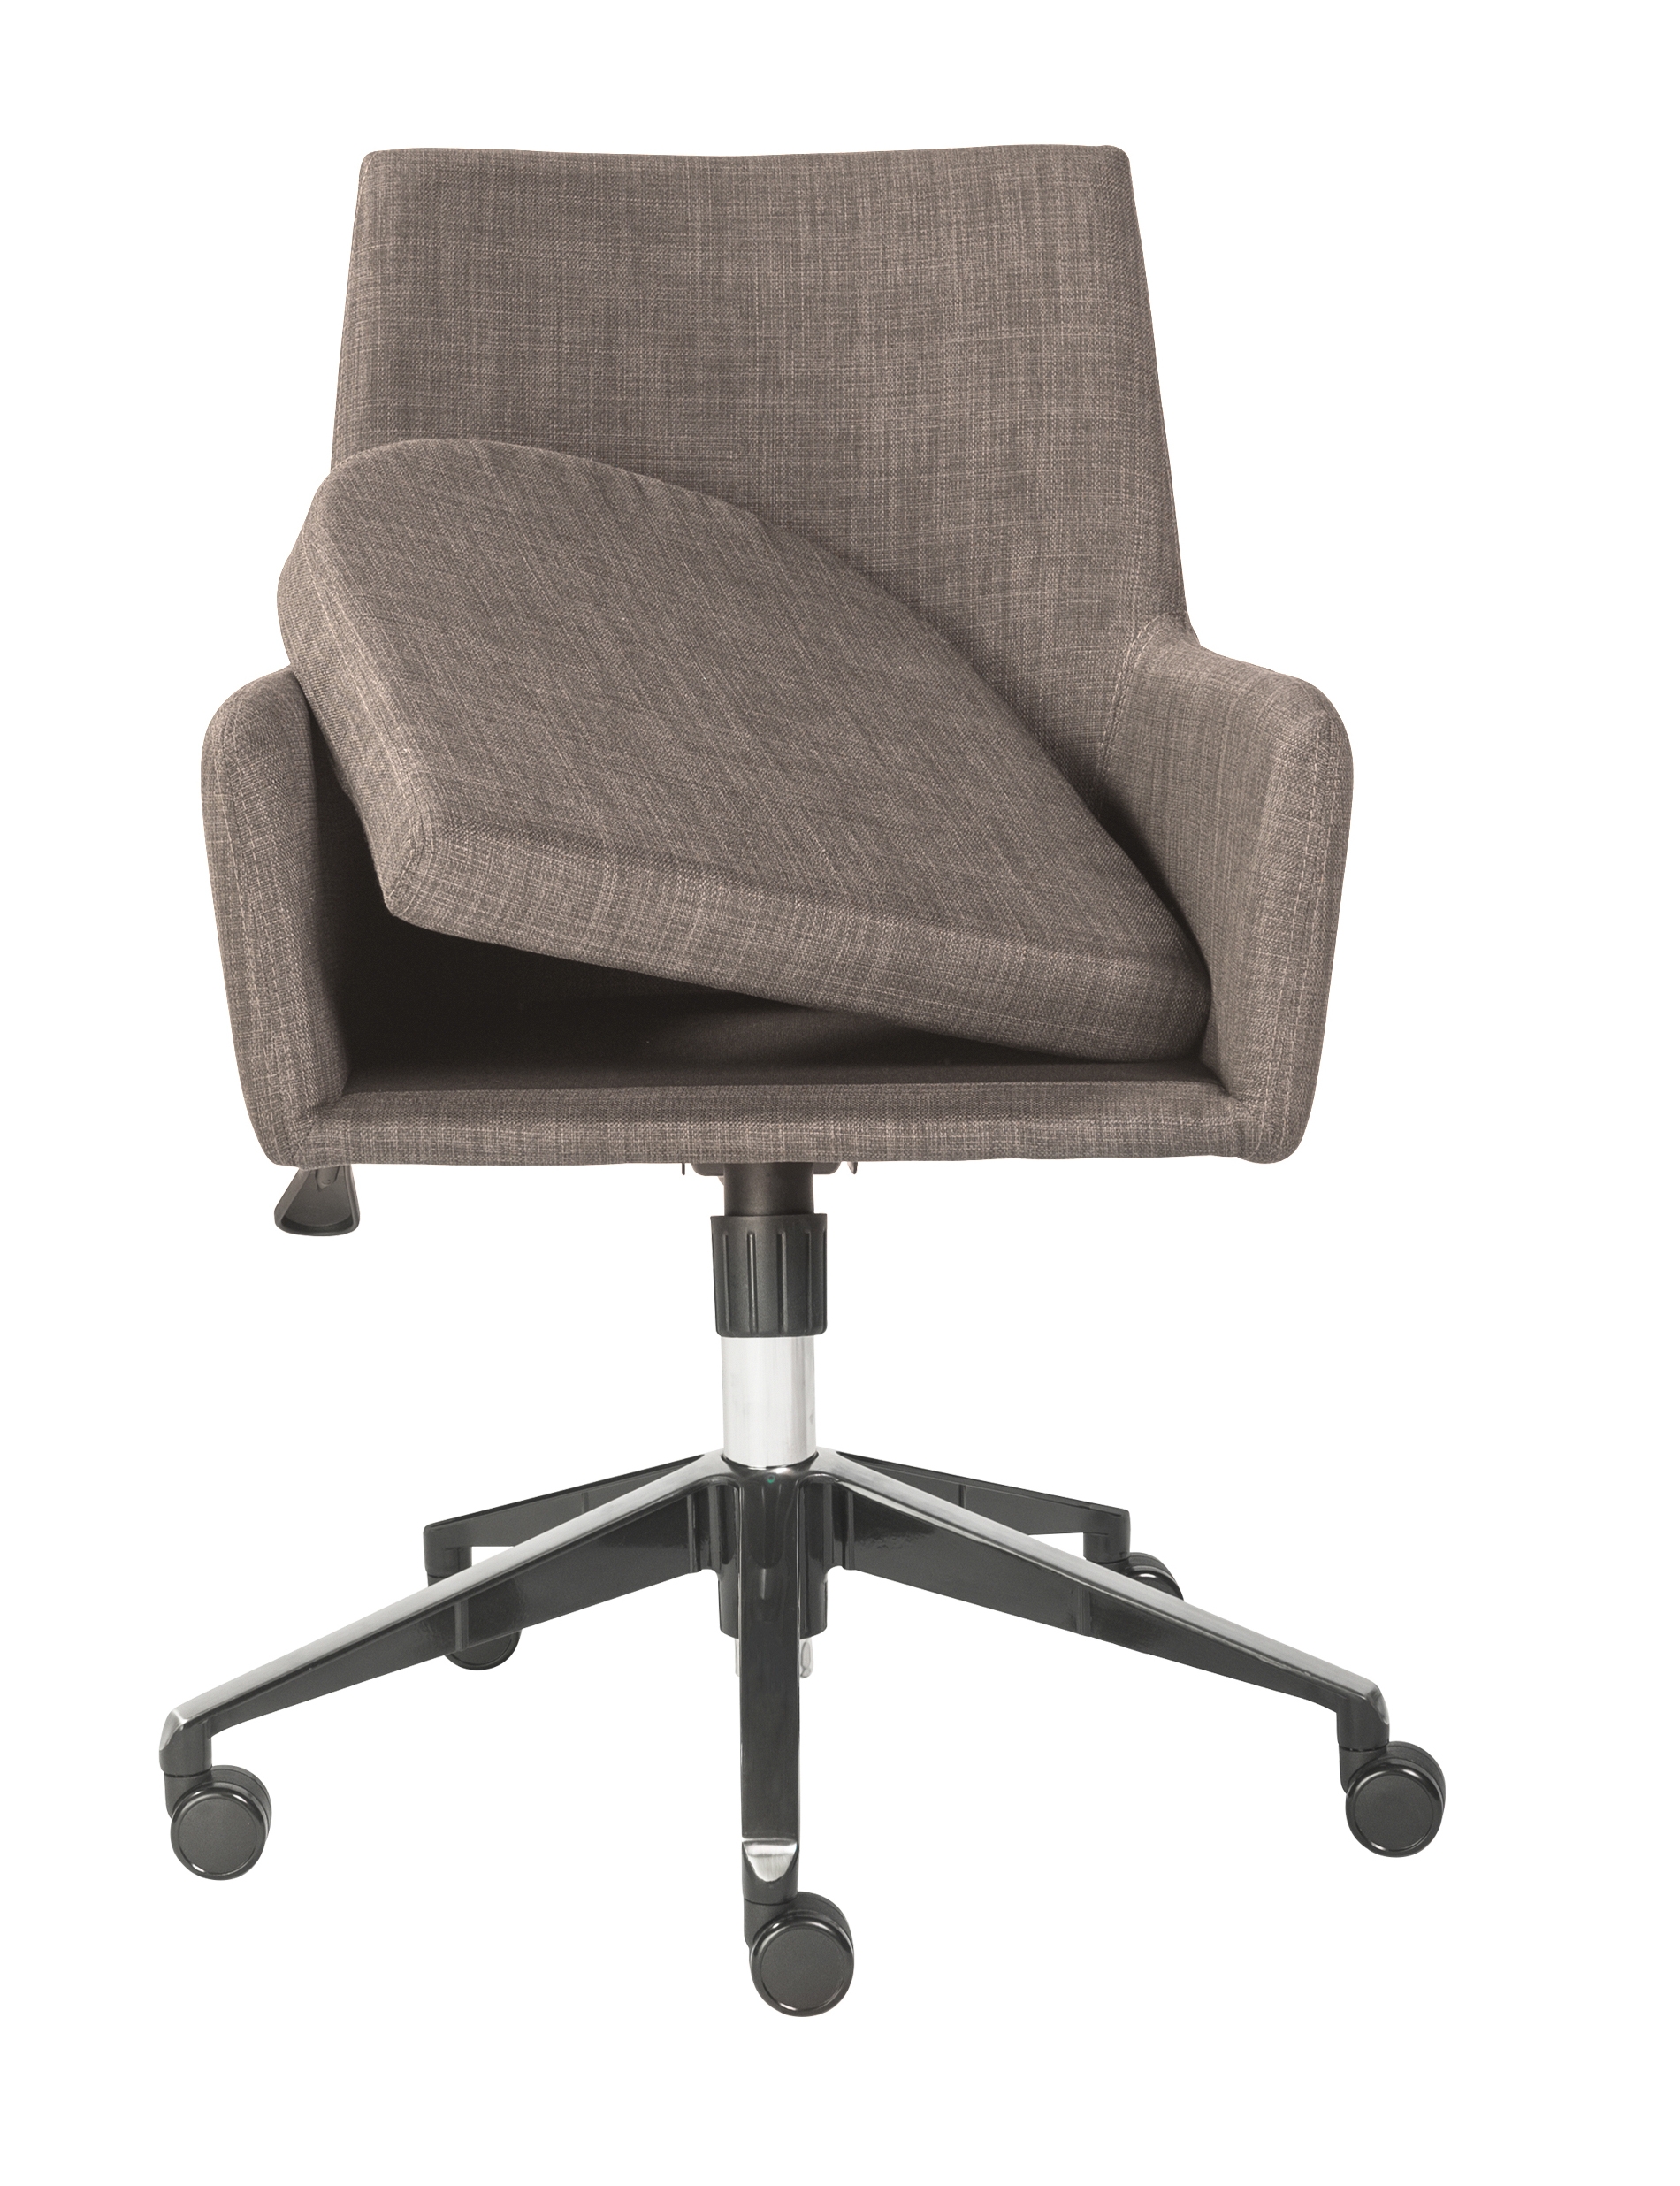 Patty Office Chair - Image 5